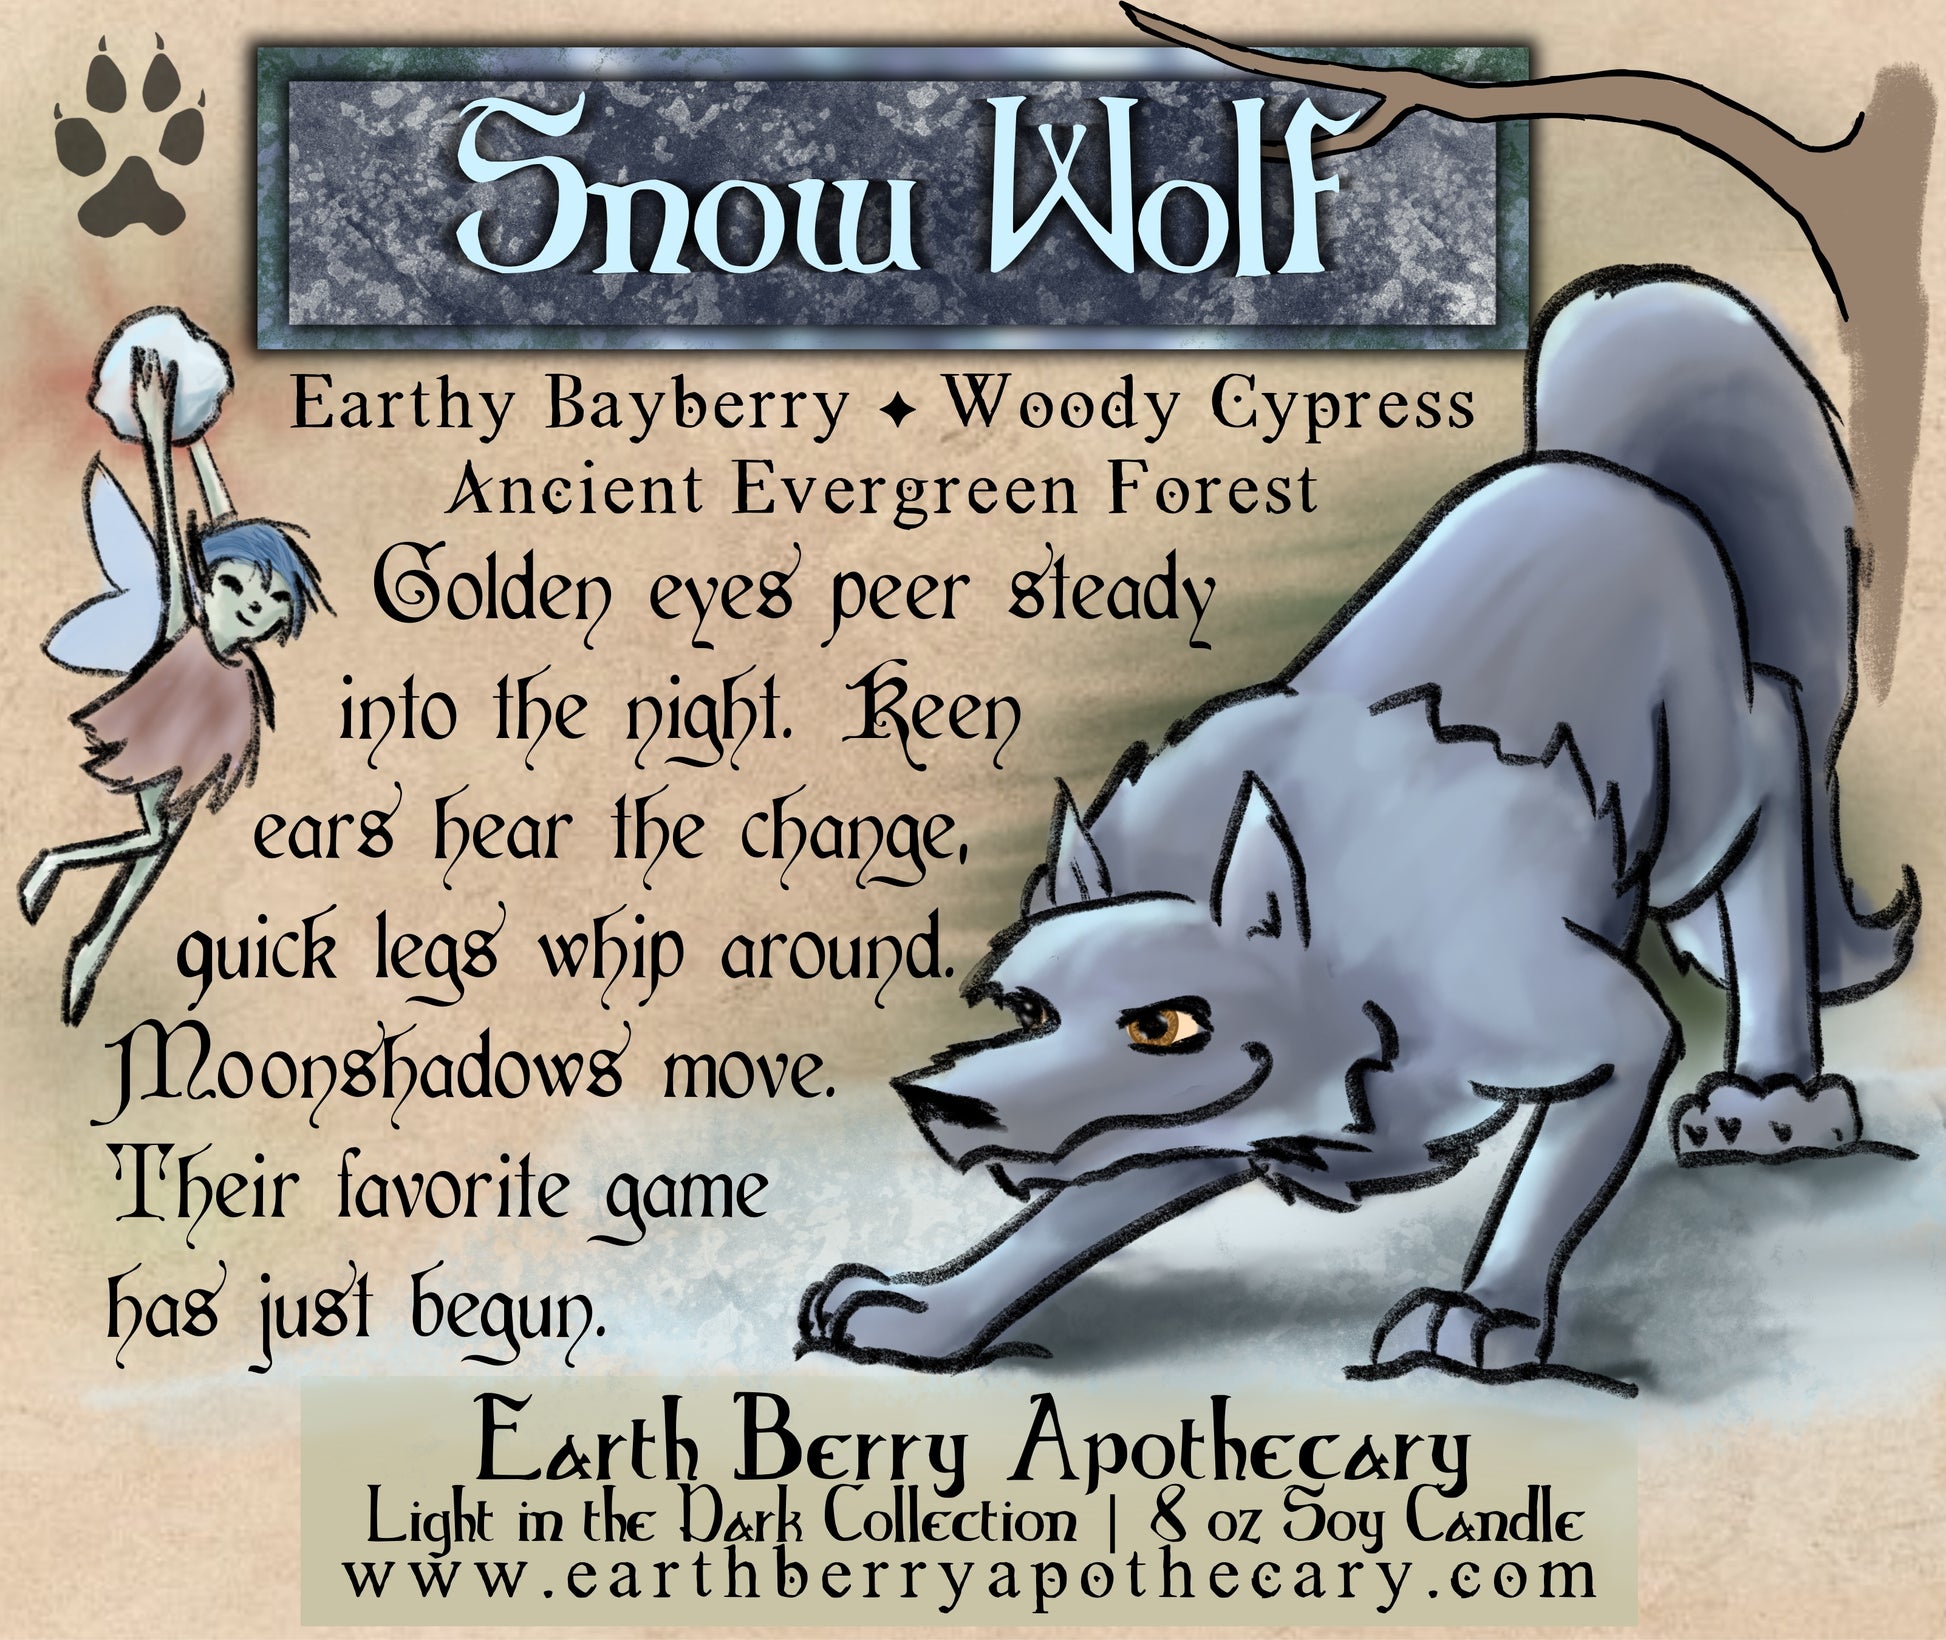 Snow wolf cypress and bayberry scented soy candle. Fantasy nature candles. Always clean burning and nontoxic. Snow wolf soy candle label features a crouching wolf and a faerie tossing a snowball